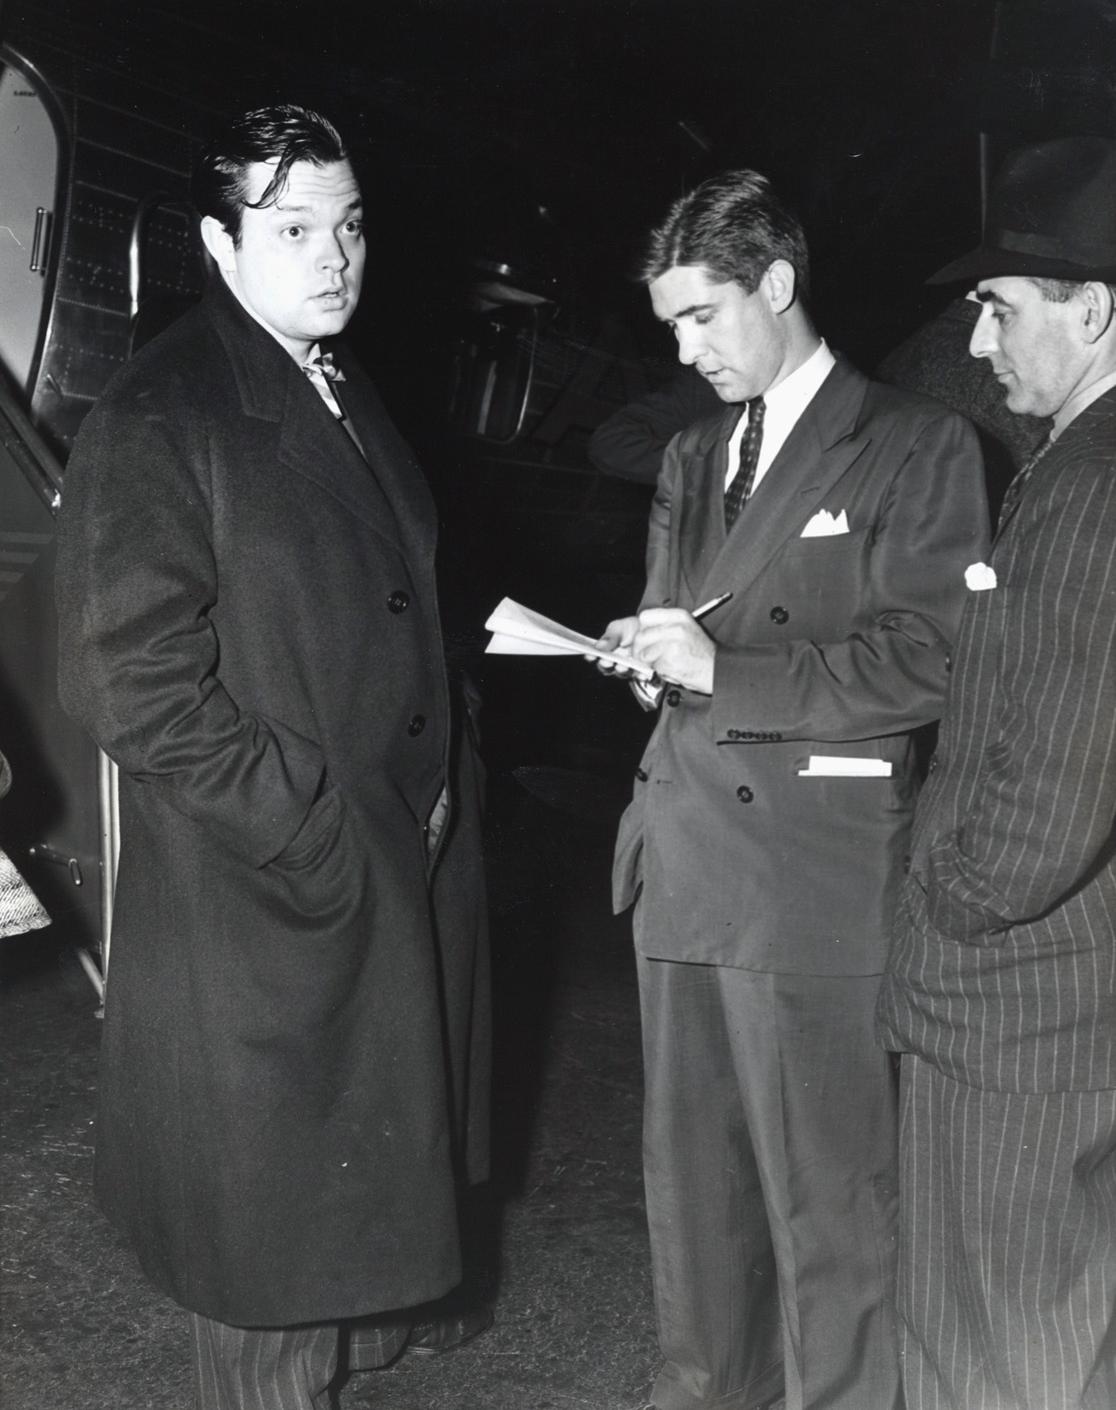 Orson Welles arriving for the New York premiere of Citizen Kane on May 1, 1941.